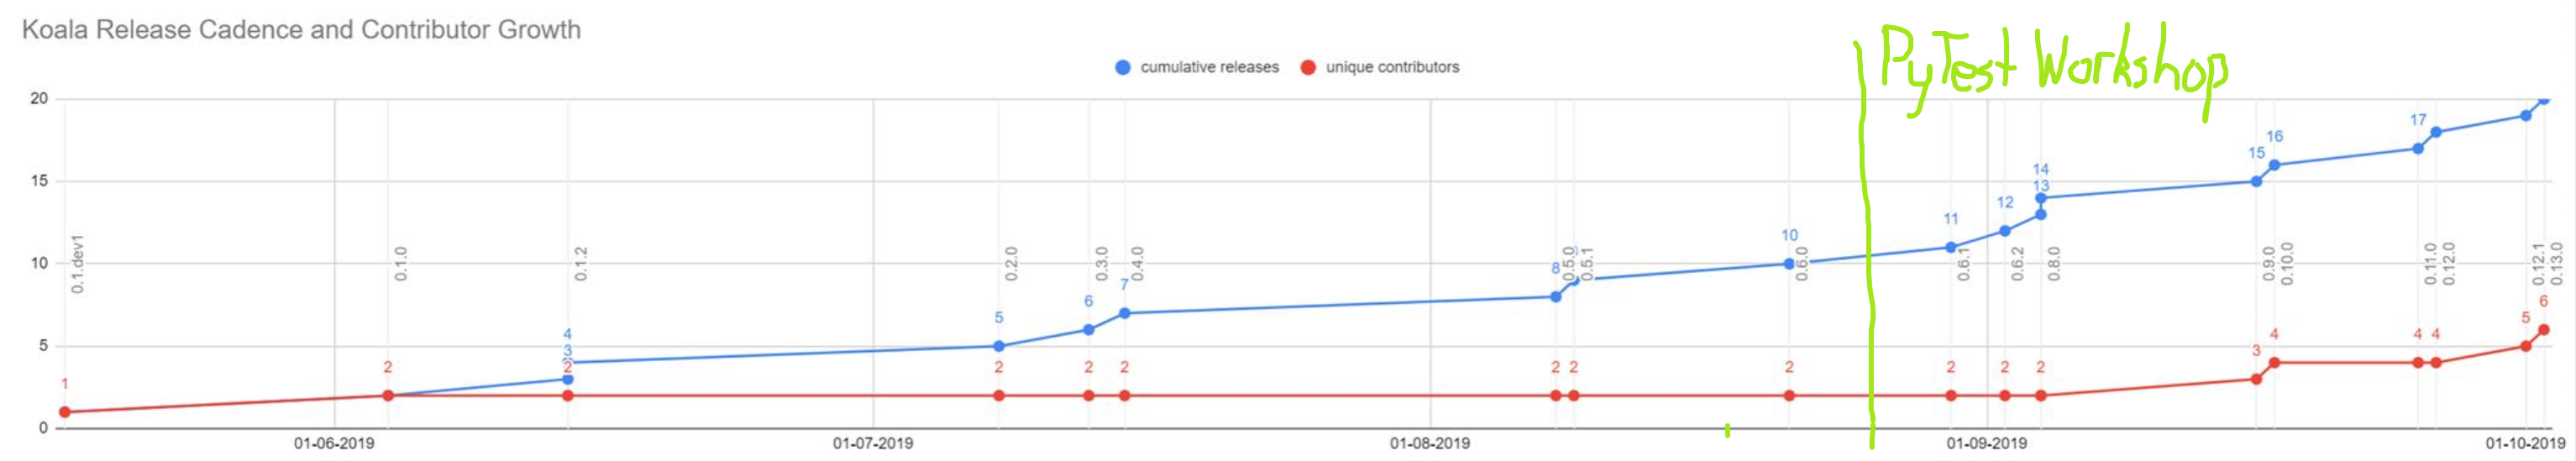 Line graph with two series about the release history of our library. Total unique contributors and cumulative number of releases. Annotation when pytest workshop happended in September.